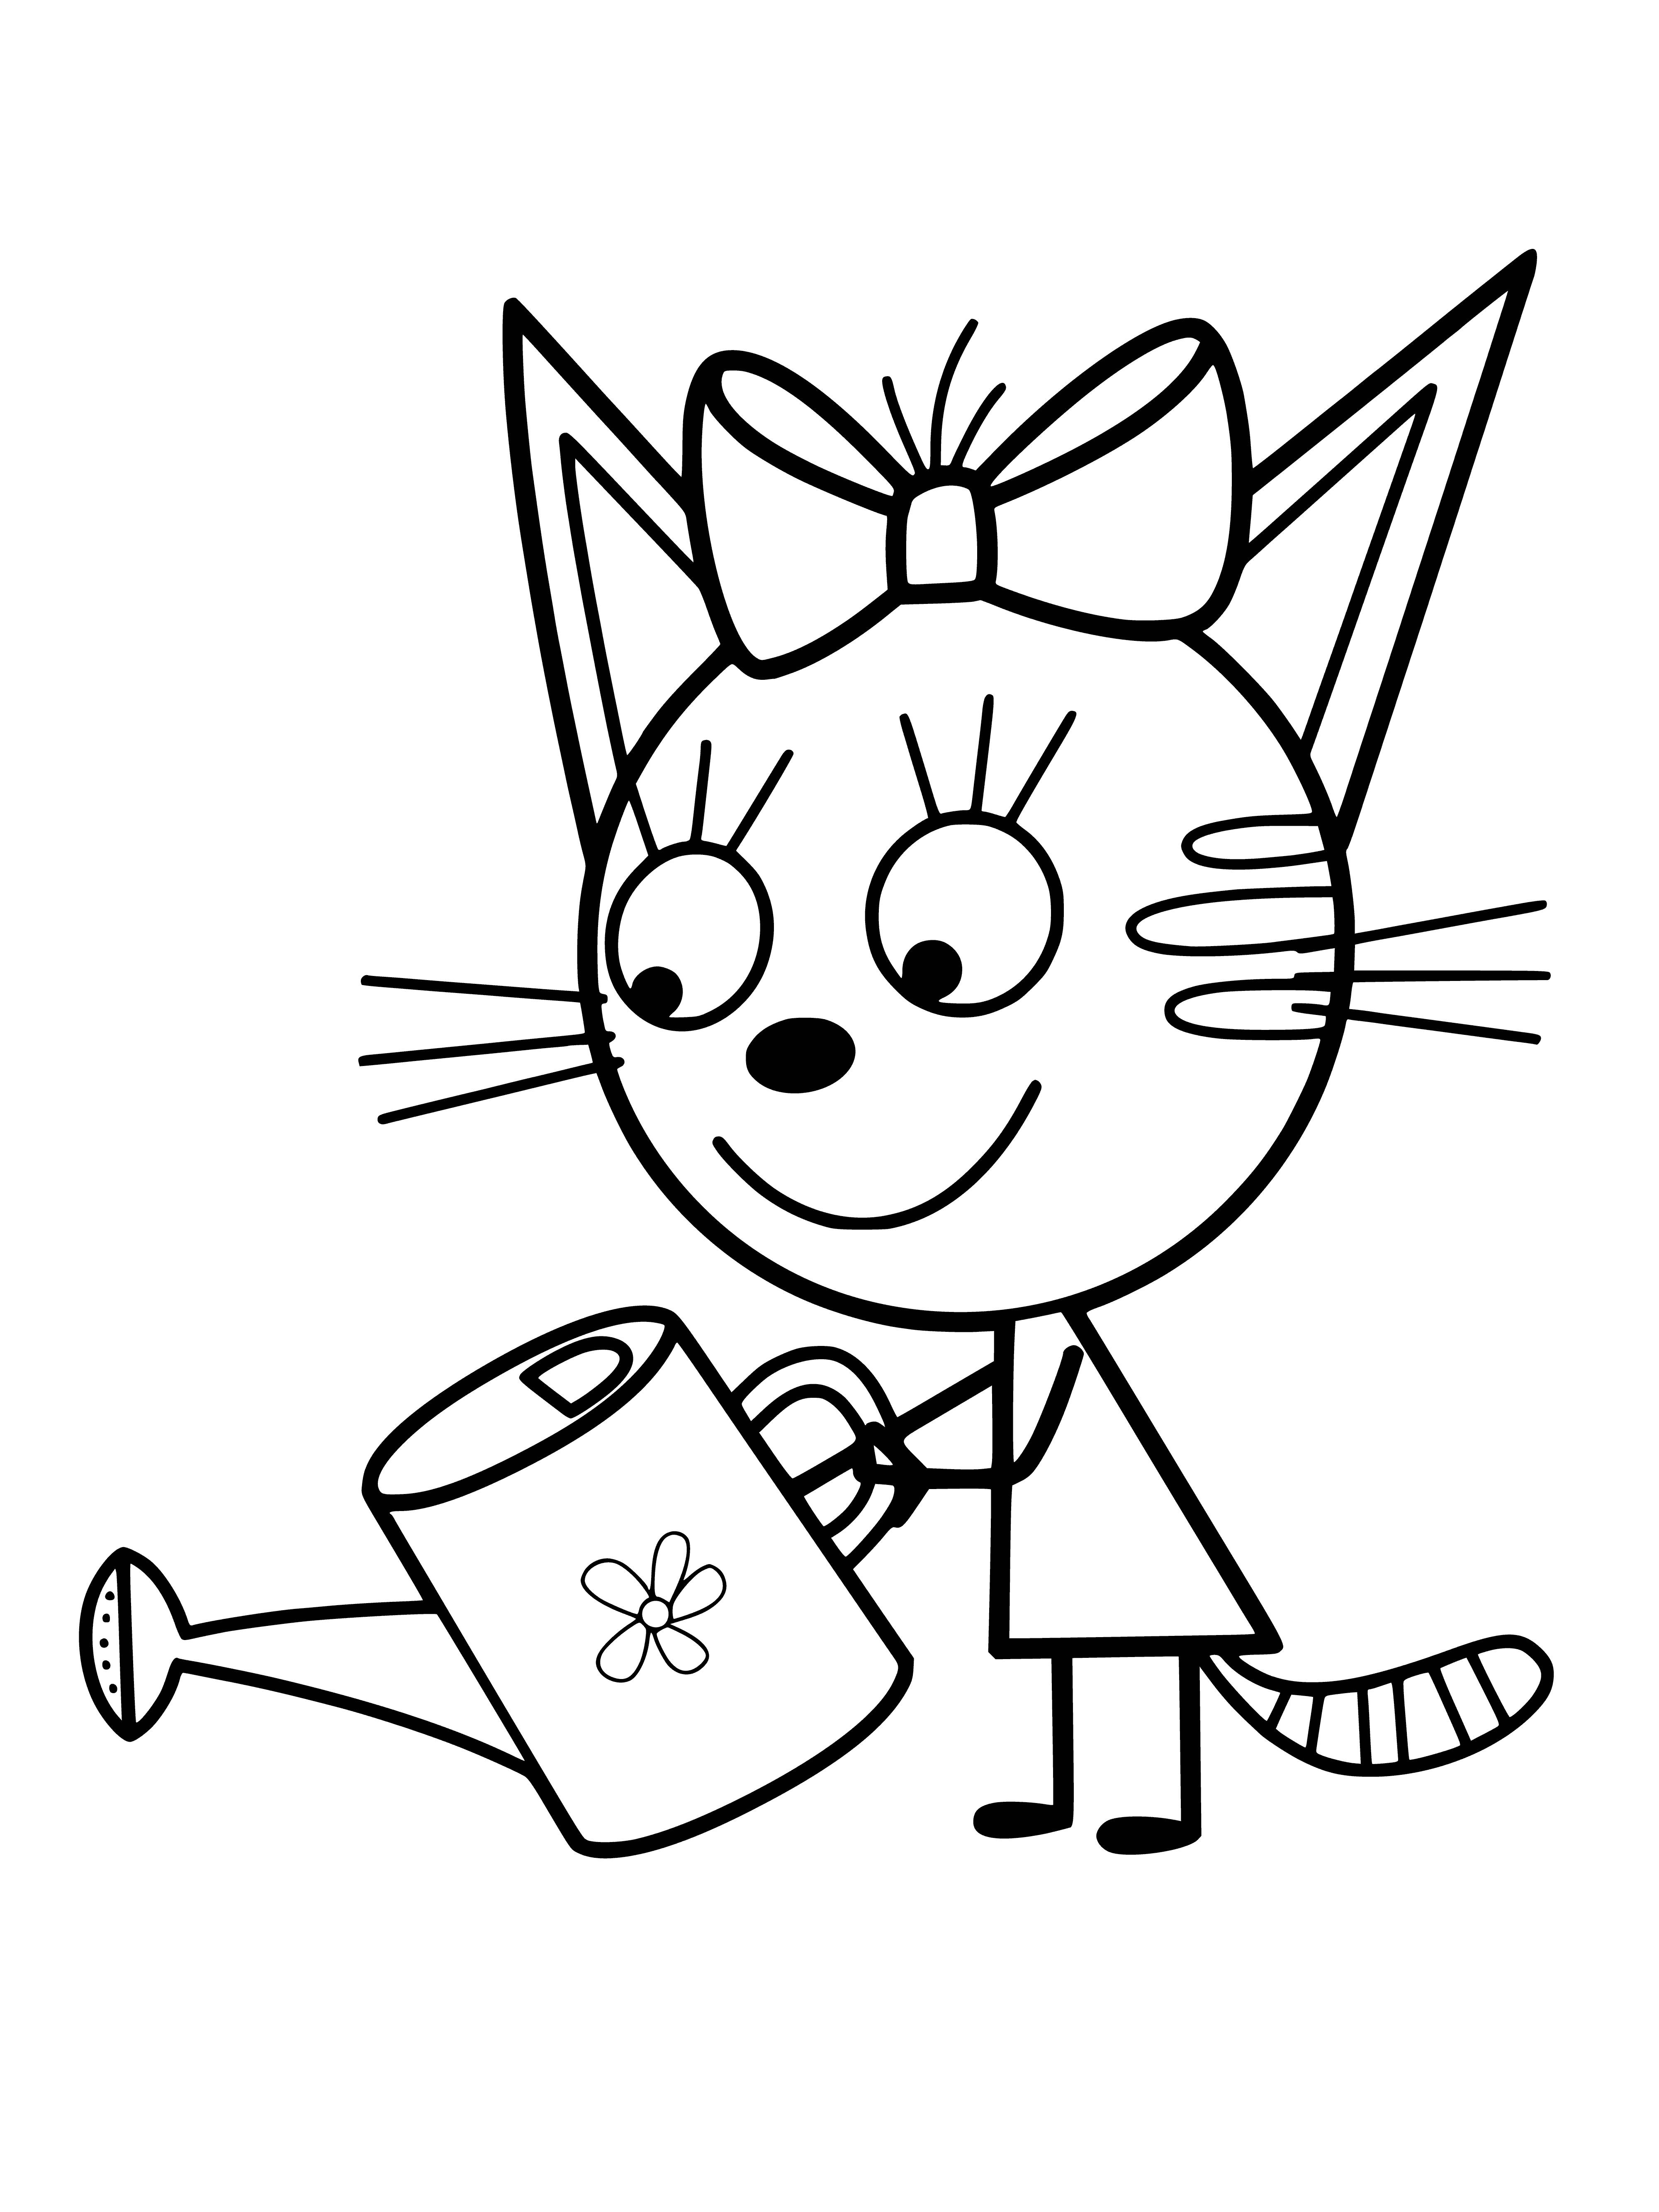 coloring page: 3 cats w/ diff. color coats pose on hind legs w/ front paws up & watering cans in mouths.